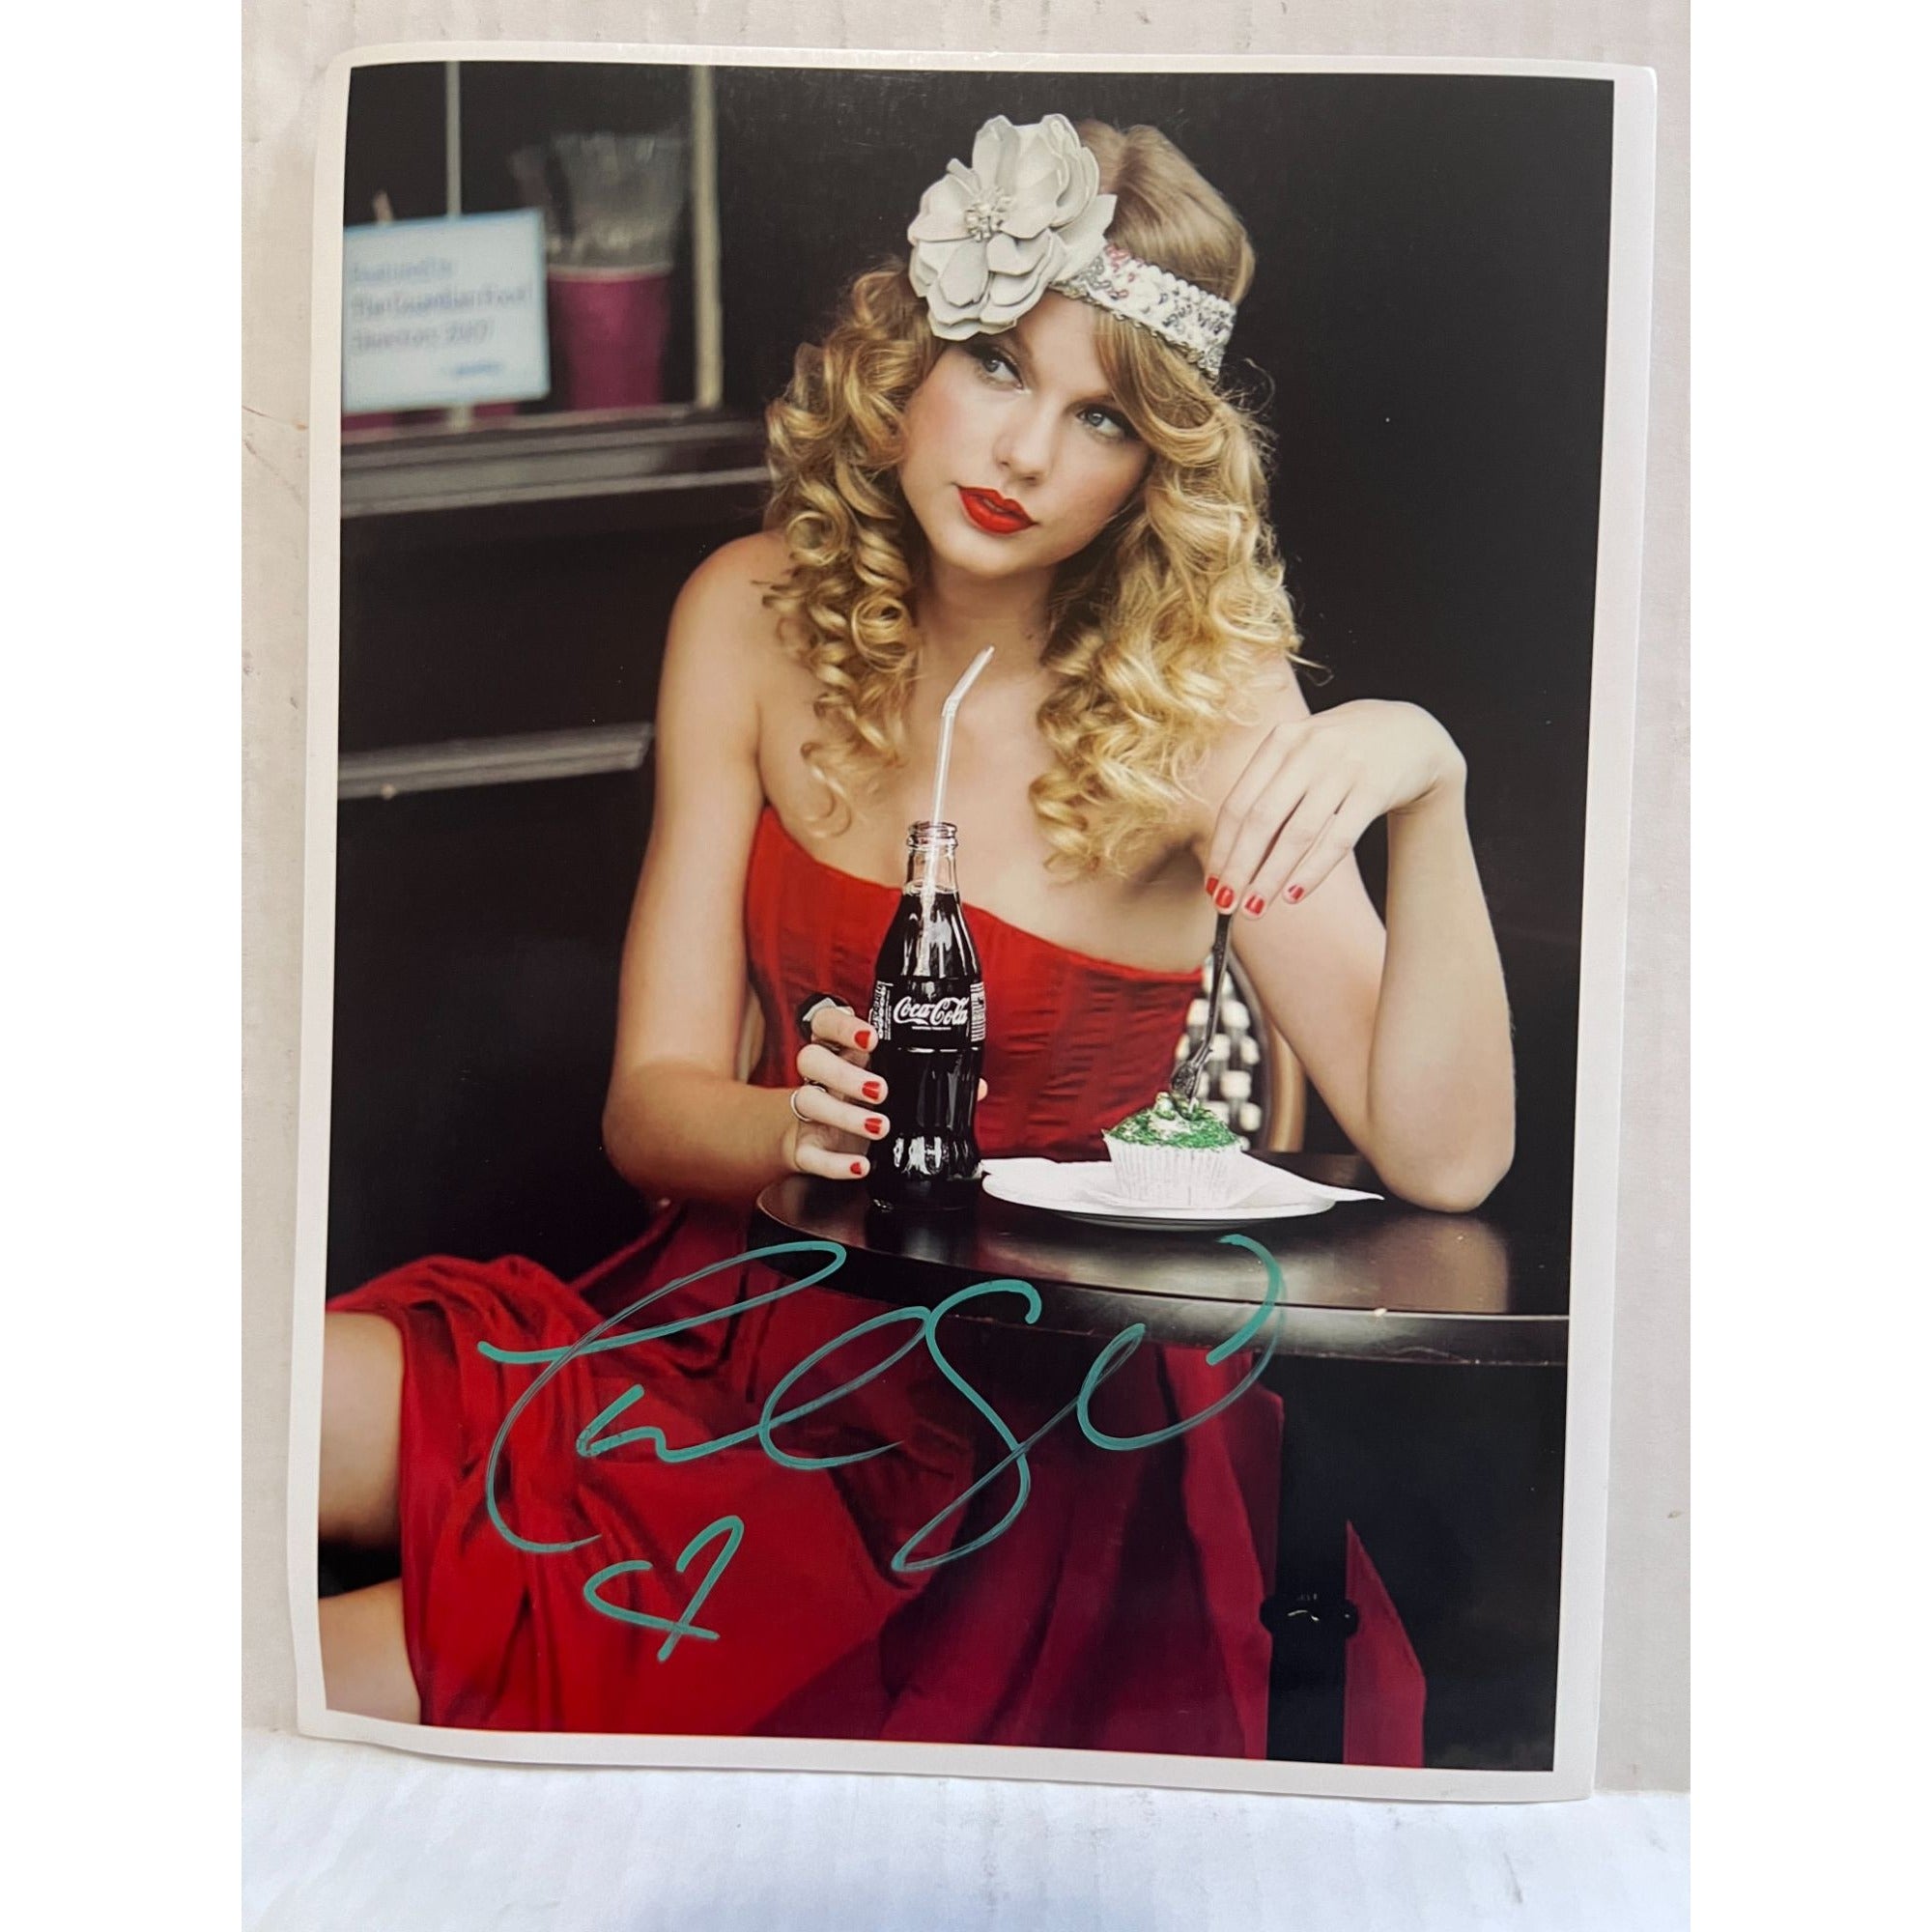 Taylor Swift 8x10 photo signed with proof